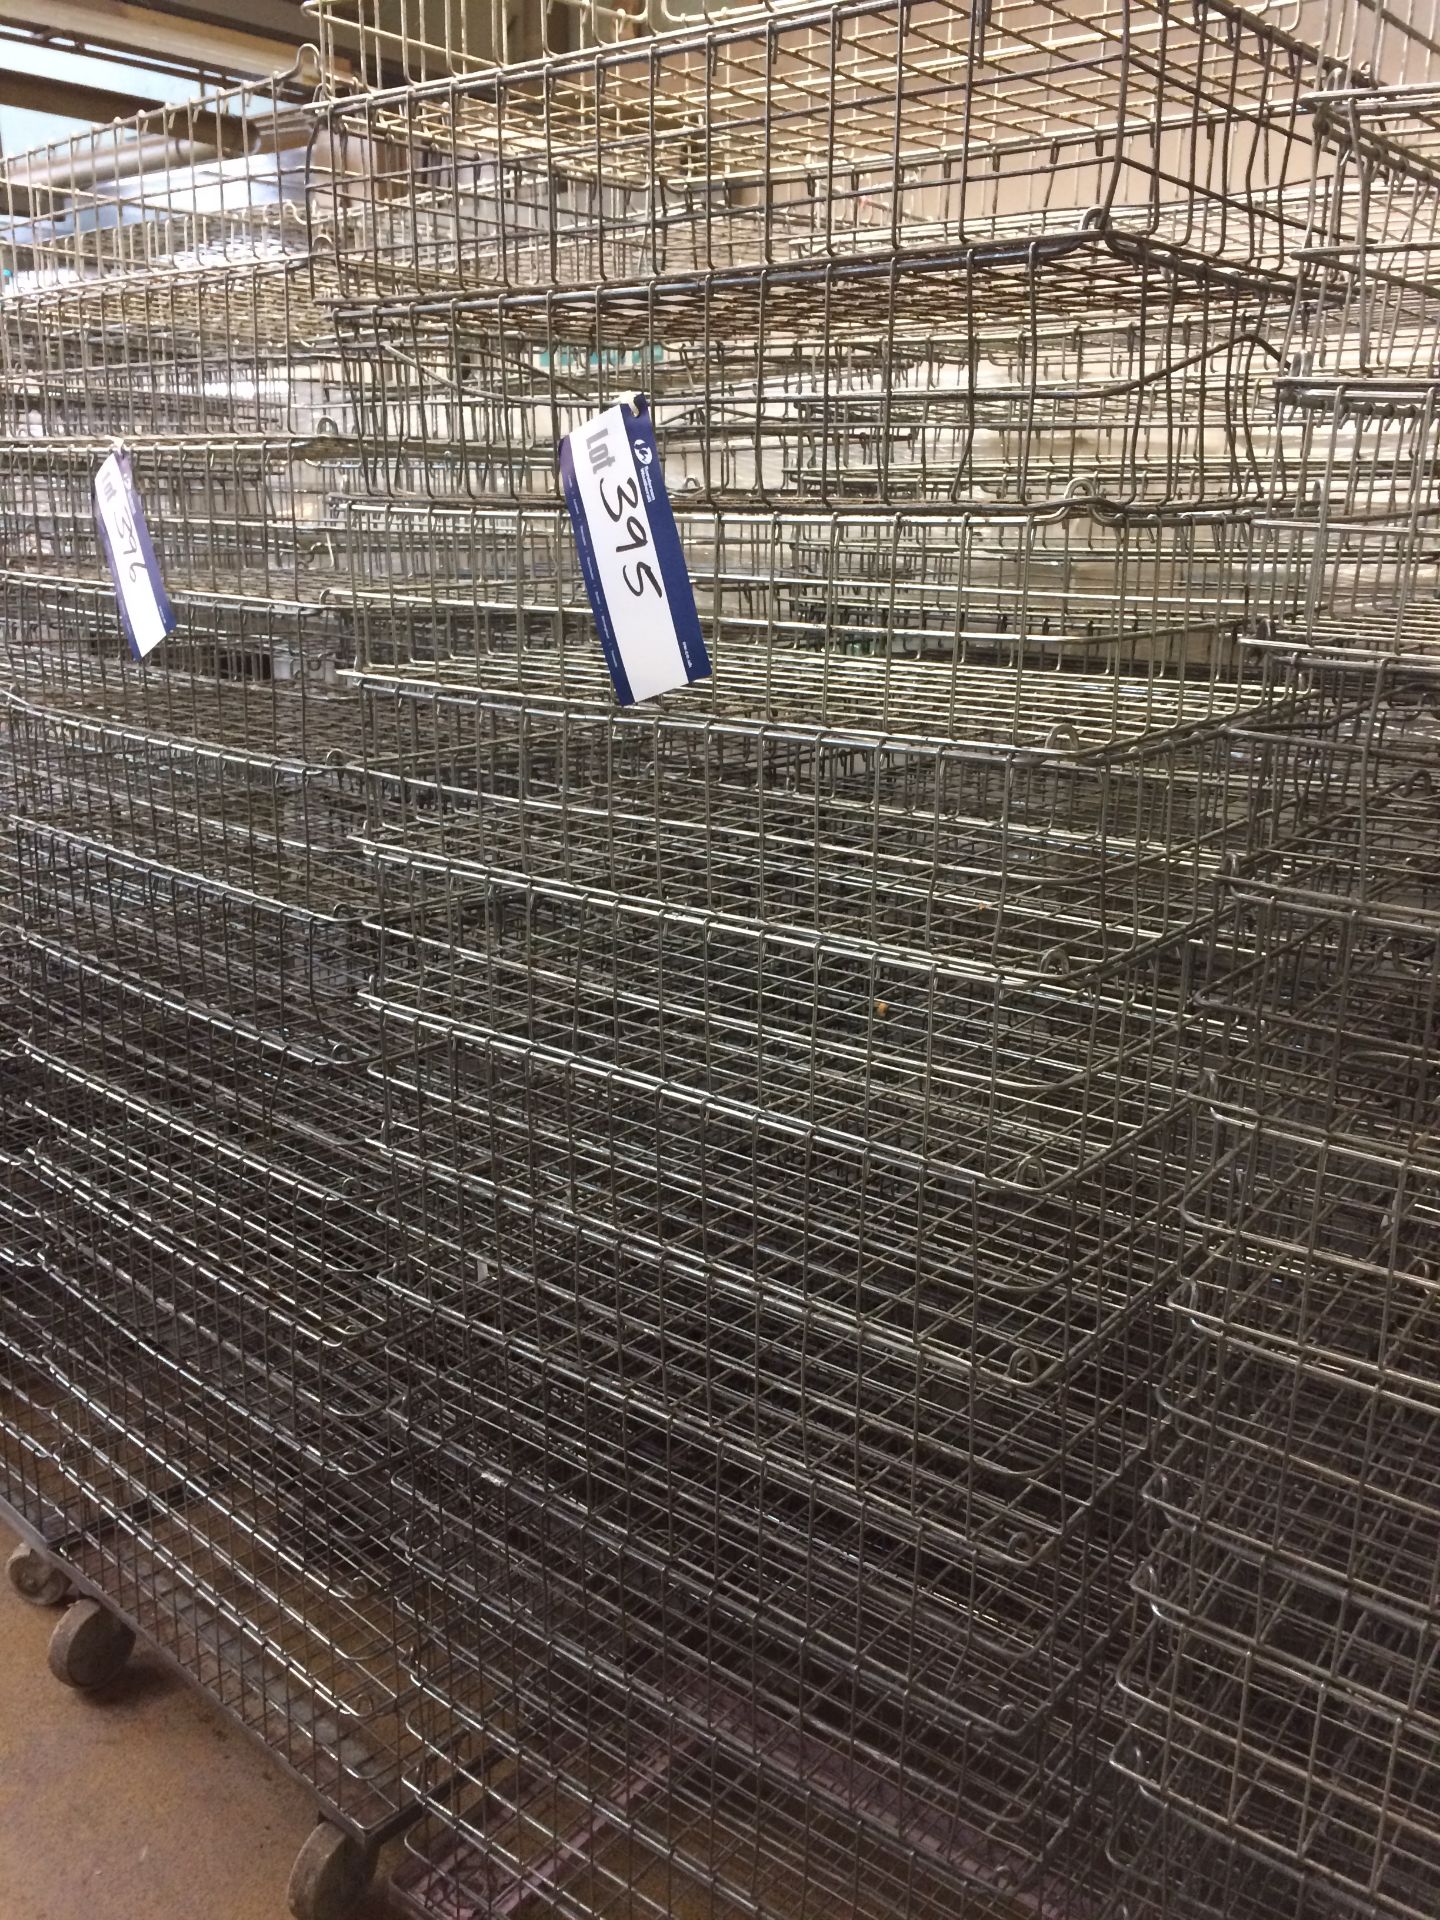 Approx. 24 Wire Baskets on 2 Trolleys (Lift Out Ch